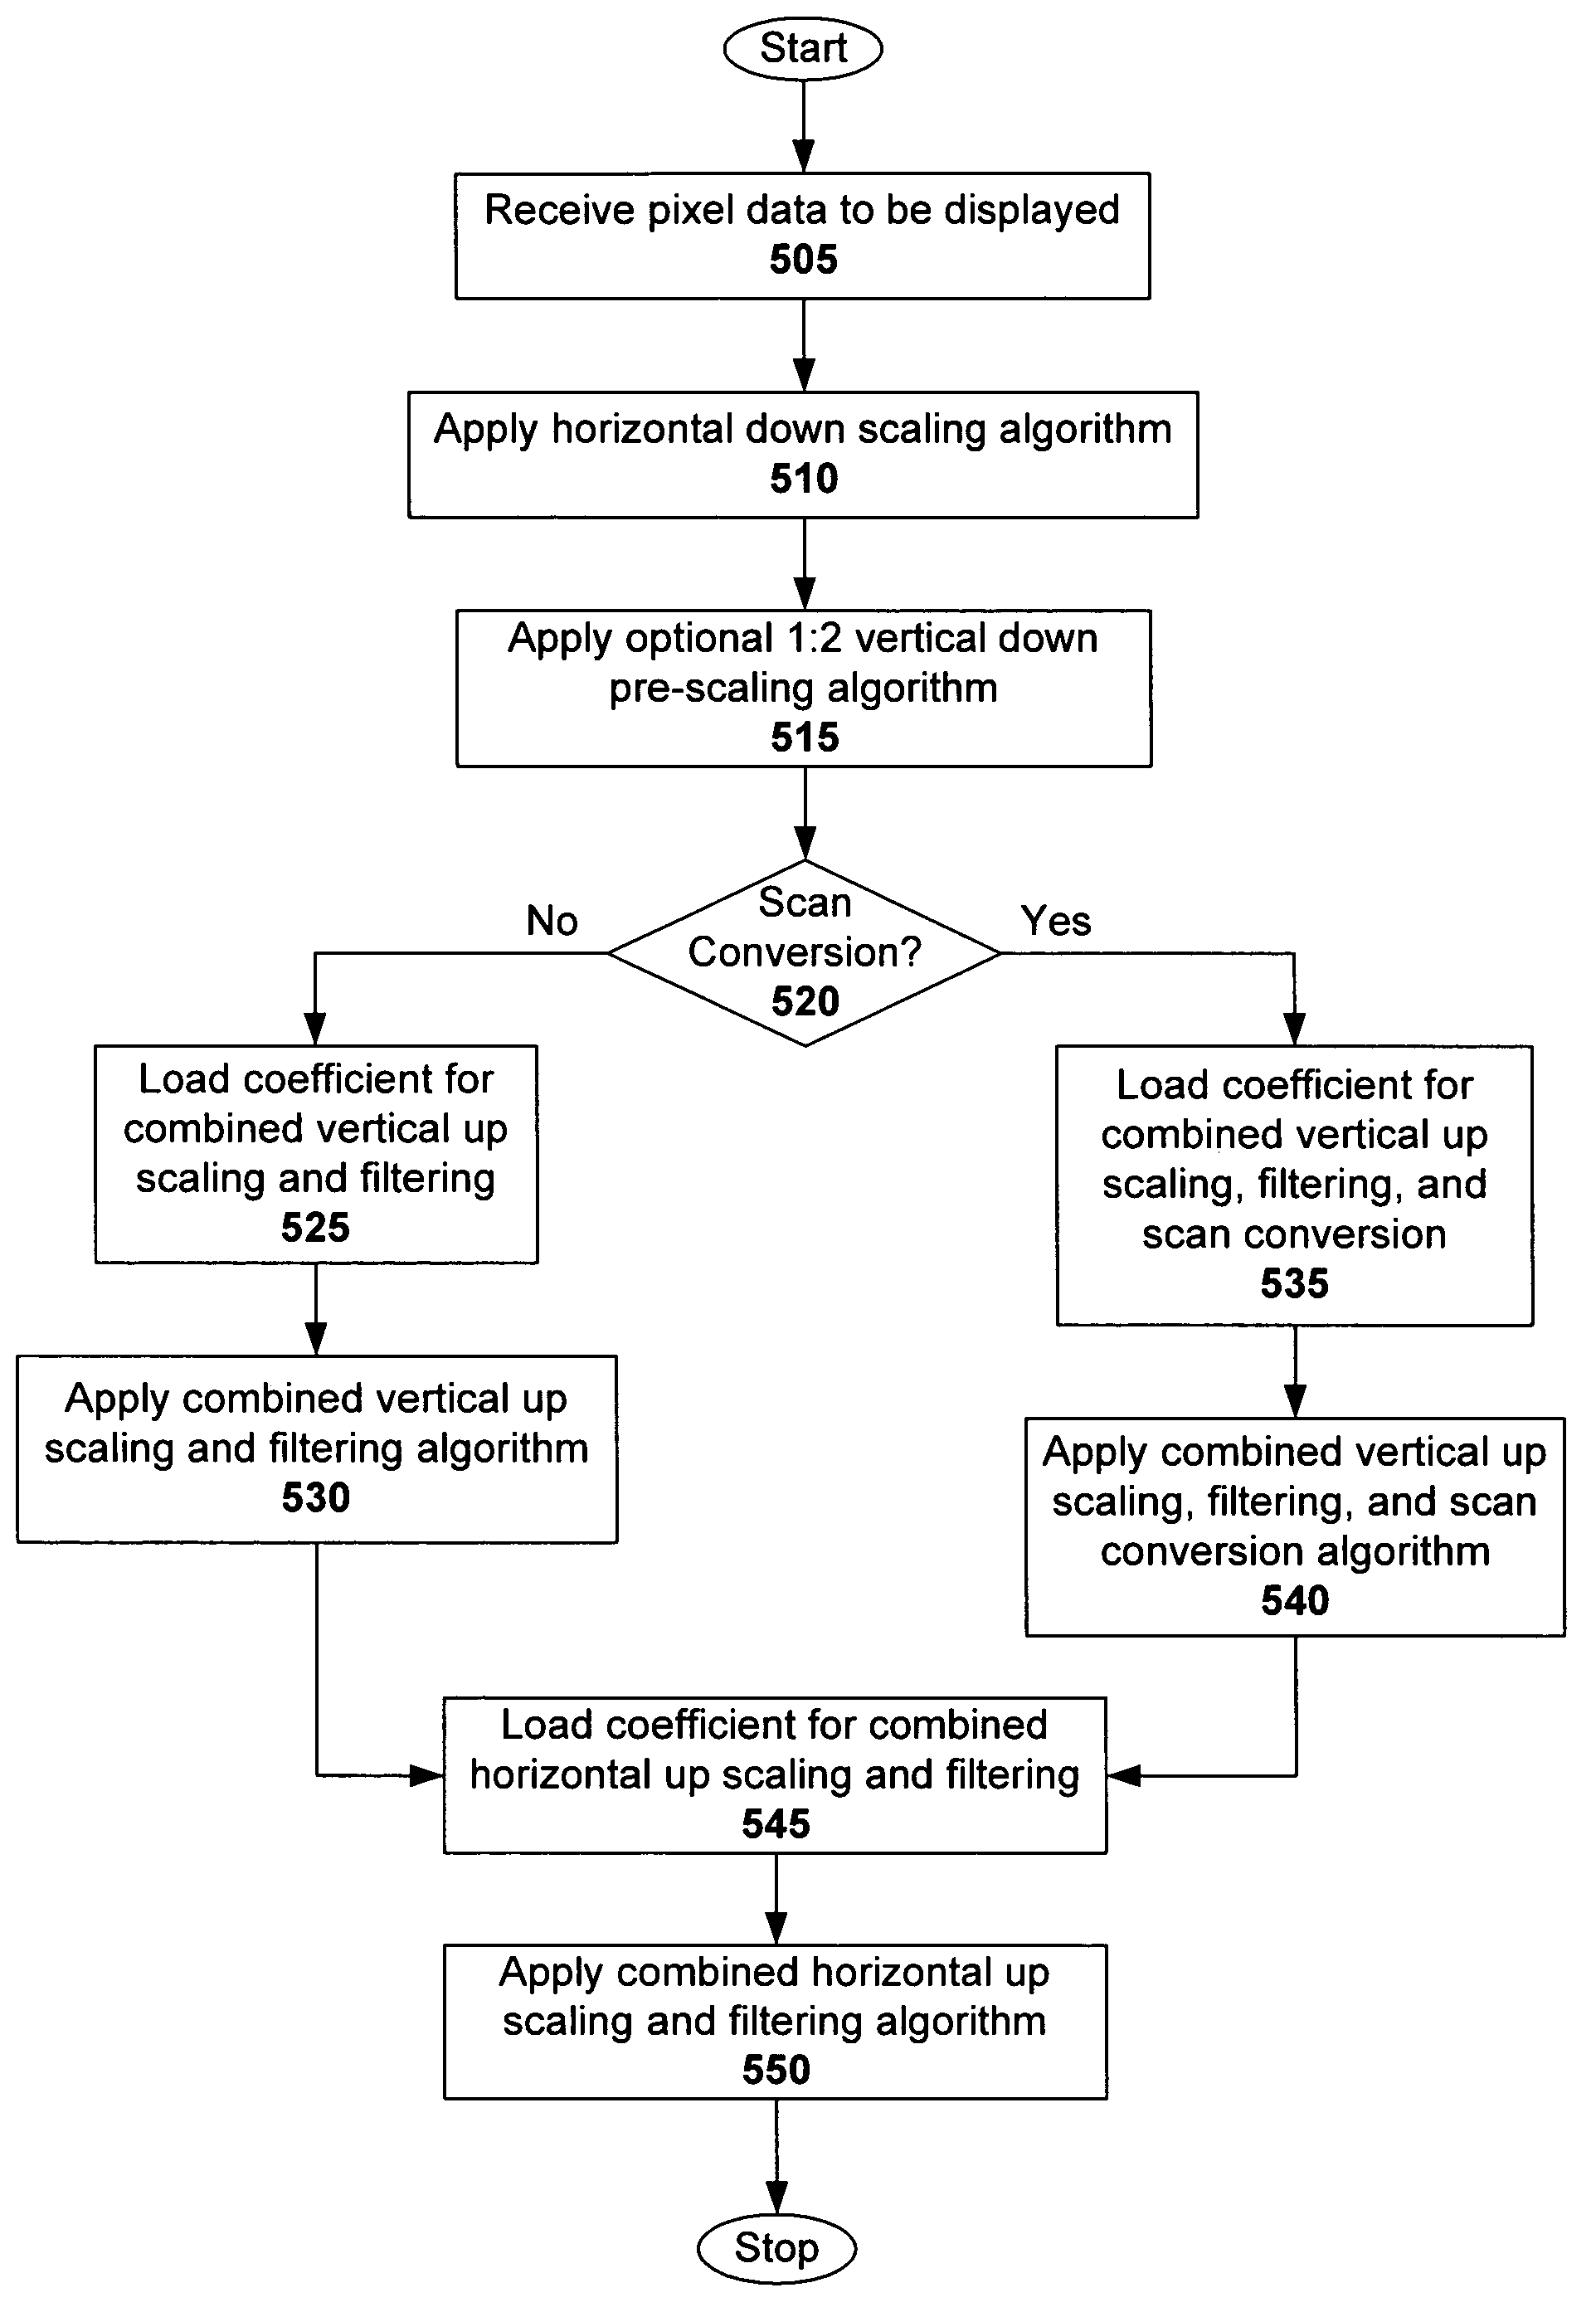 Combined scaling, filtering, and scan conversion